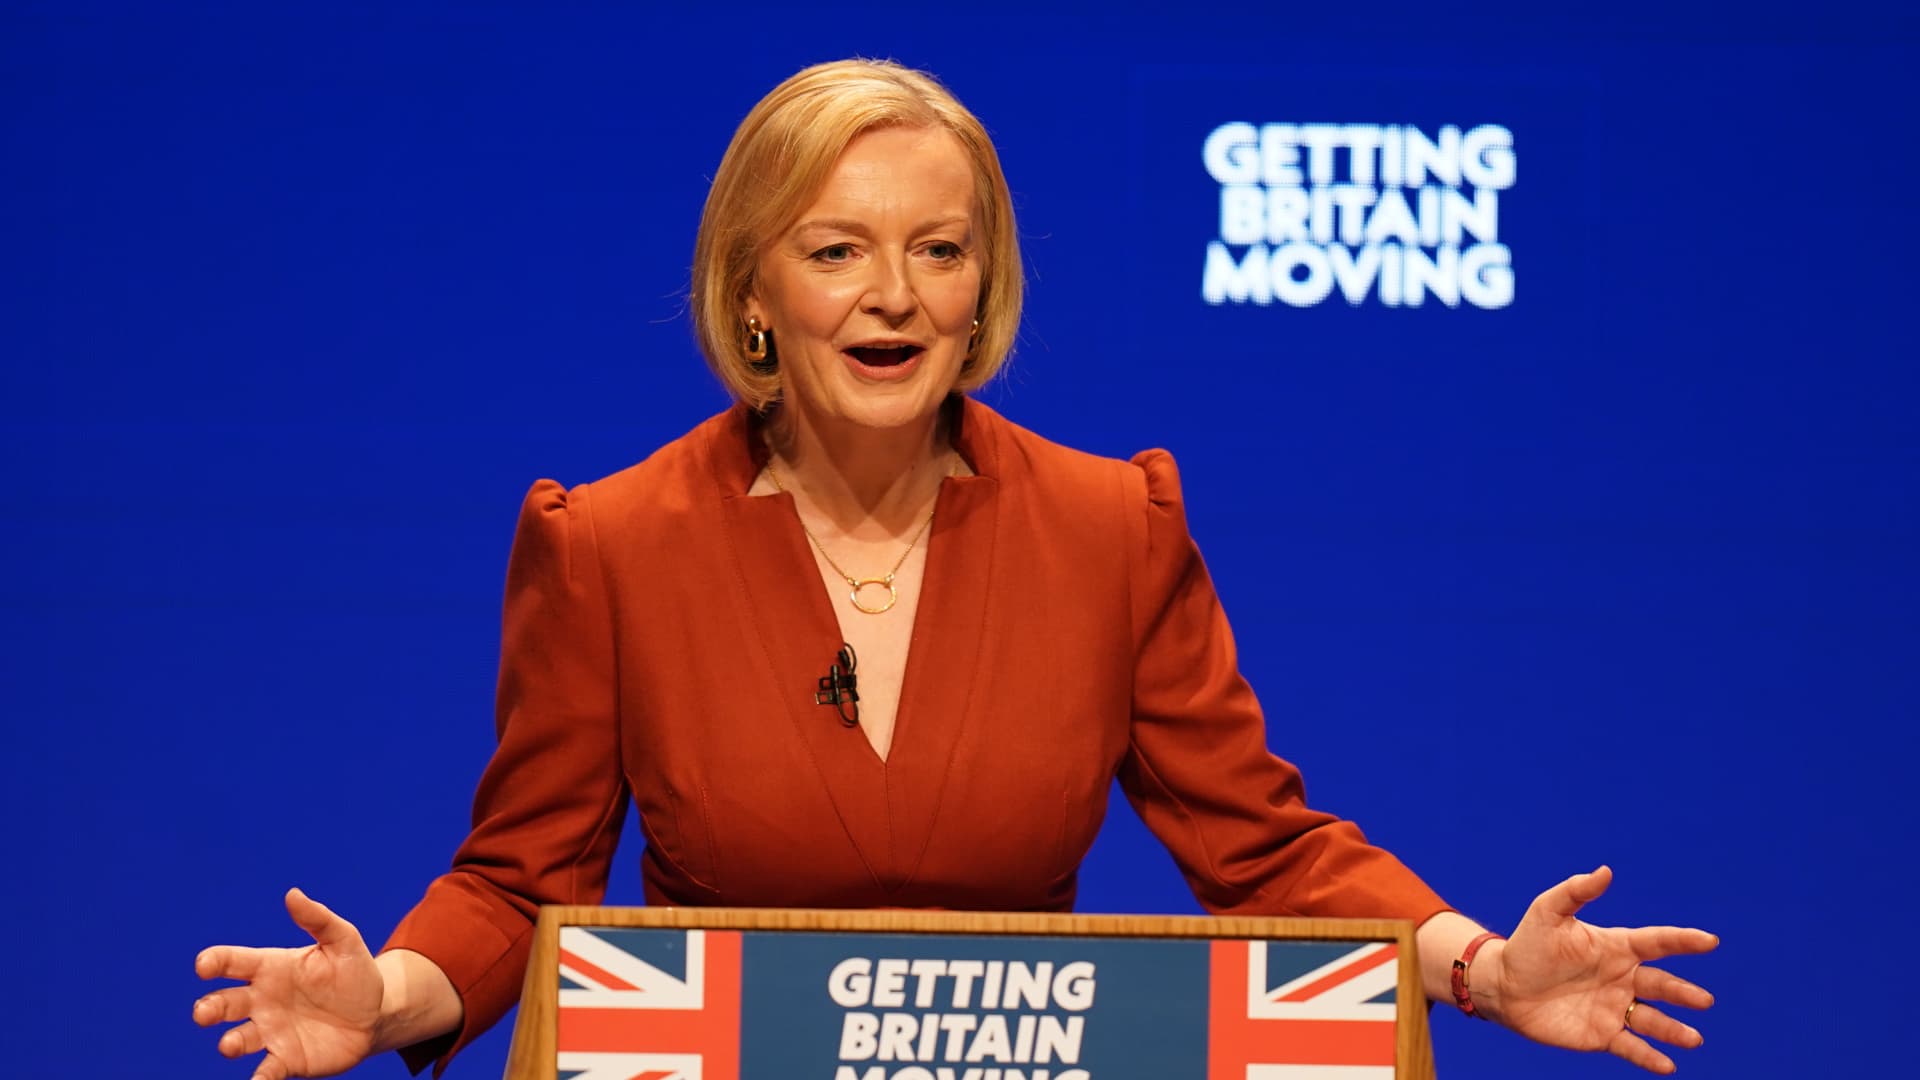 UK’s Liz Truss pledges tax-cutting future in landmark speech plagued by protest and political infighting – CNBC